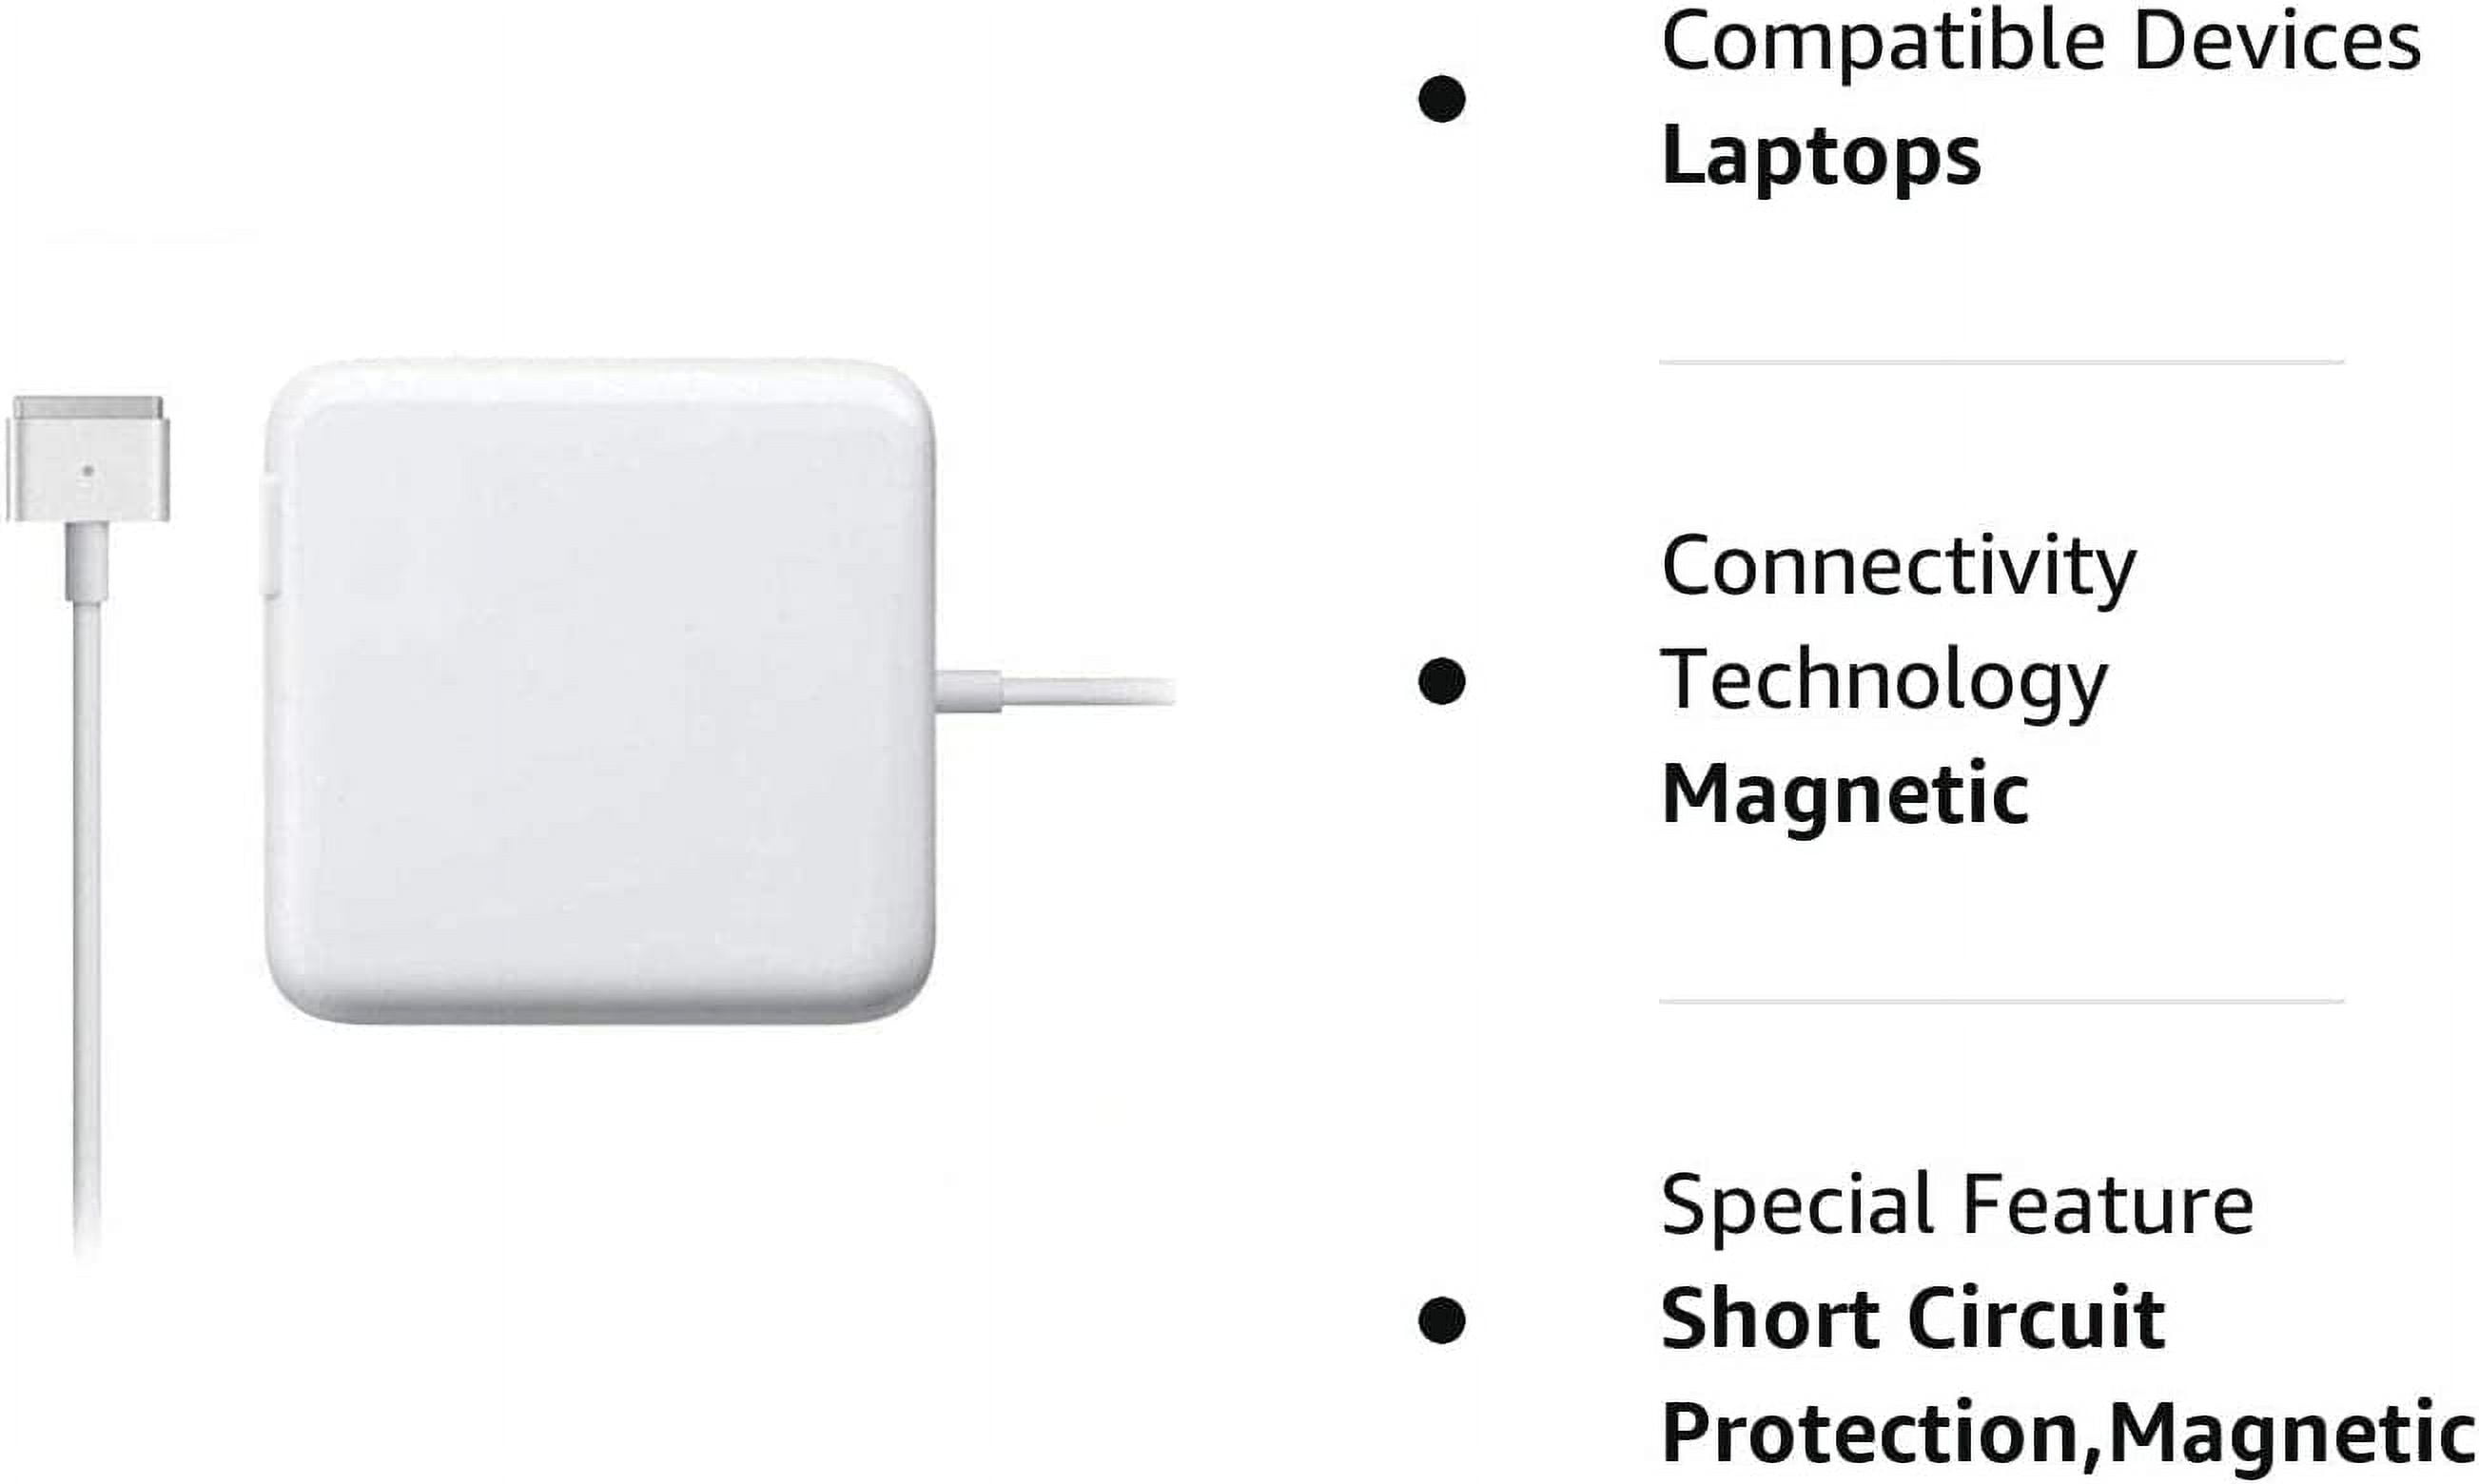  Mac Book Pro Charger, AC 85w Magnetic T-Tip Power Adapter  Charger Compatible with MacBook Pro 17/15/13 Inch (Retina, 2012-2015) :  Electronics